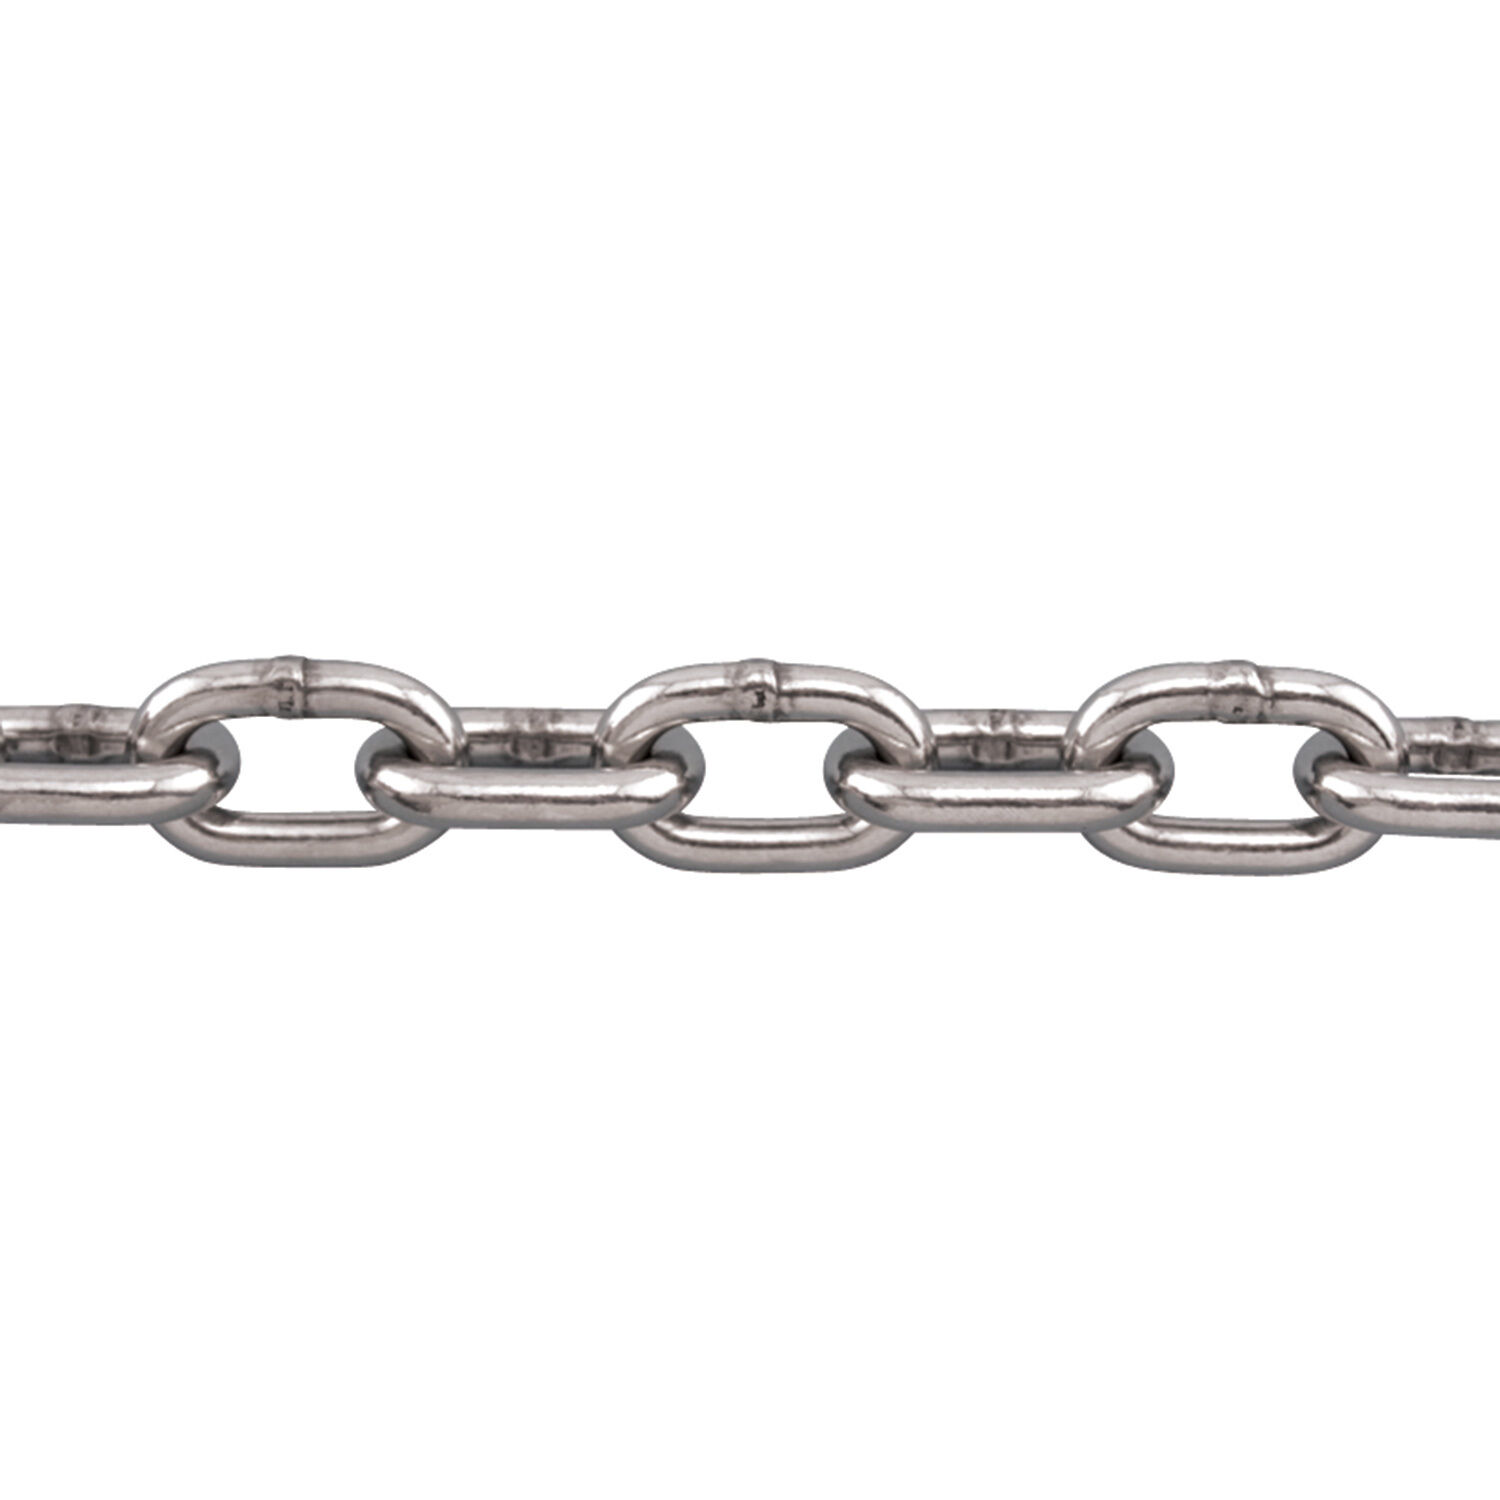 20 x BOW SHACKLE PIN CHAIN HITCH LINKS 6MM GALVANISED STEEL 